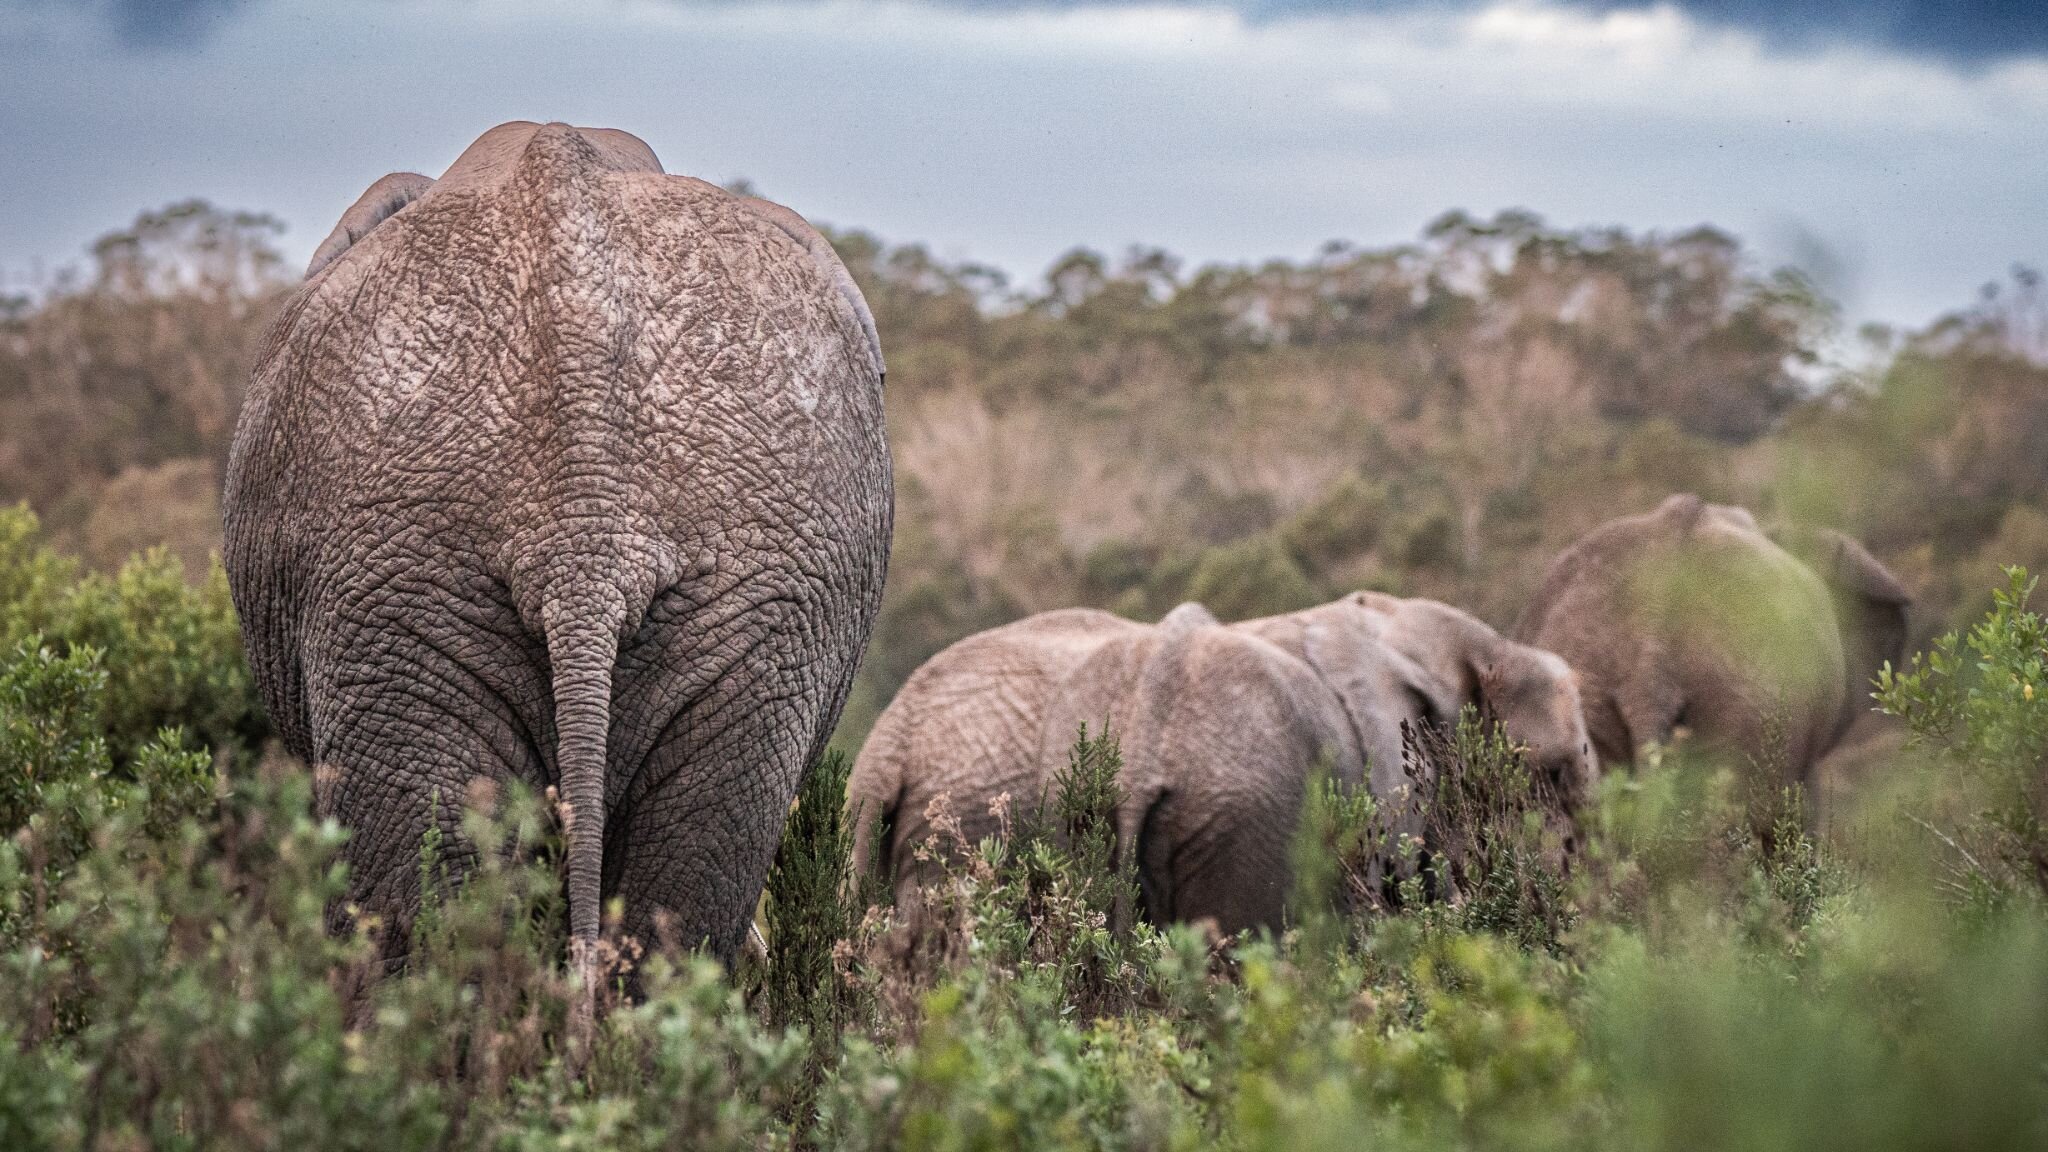 Family Values 🐘

First and foremost, the family structure is at the heart of elephant herds. These groups are like tight-knit families, often led by a wise and experienced matriarch. She's like the wise grandma who looks out for everyone. Whether it